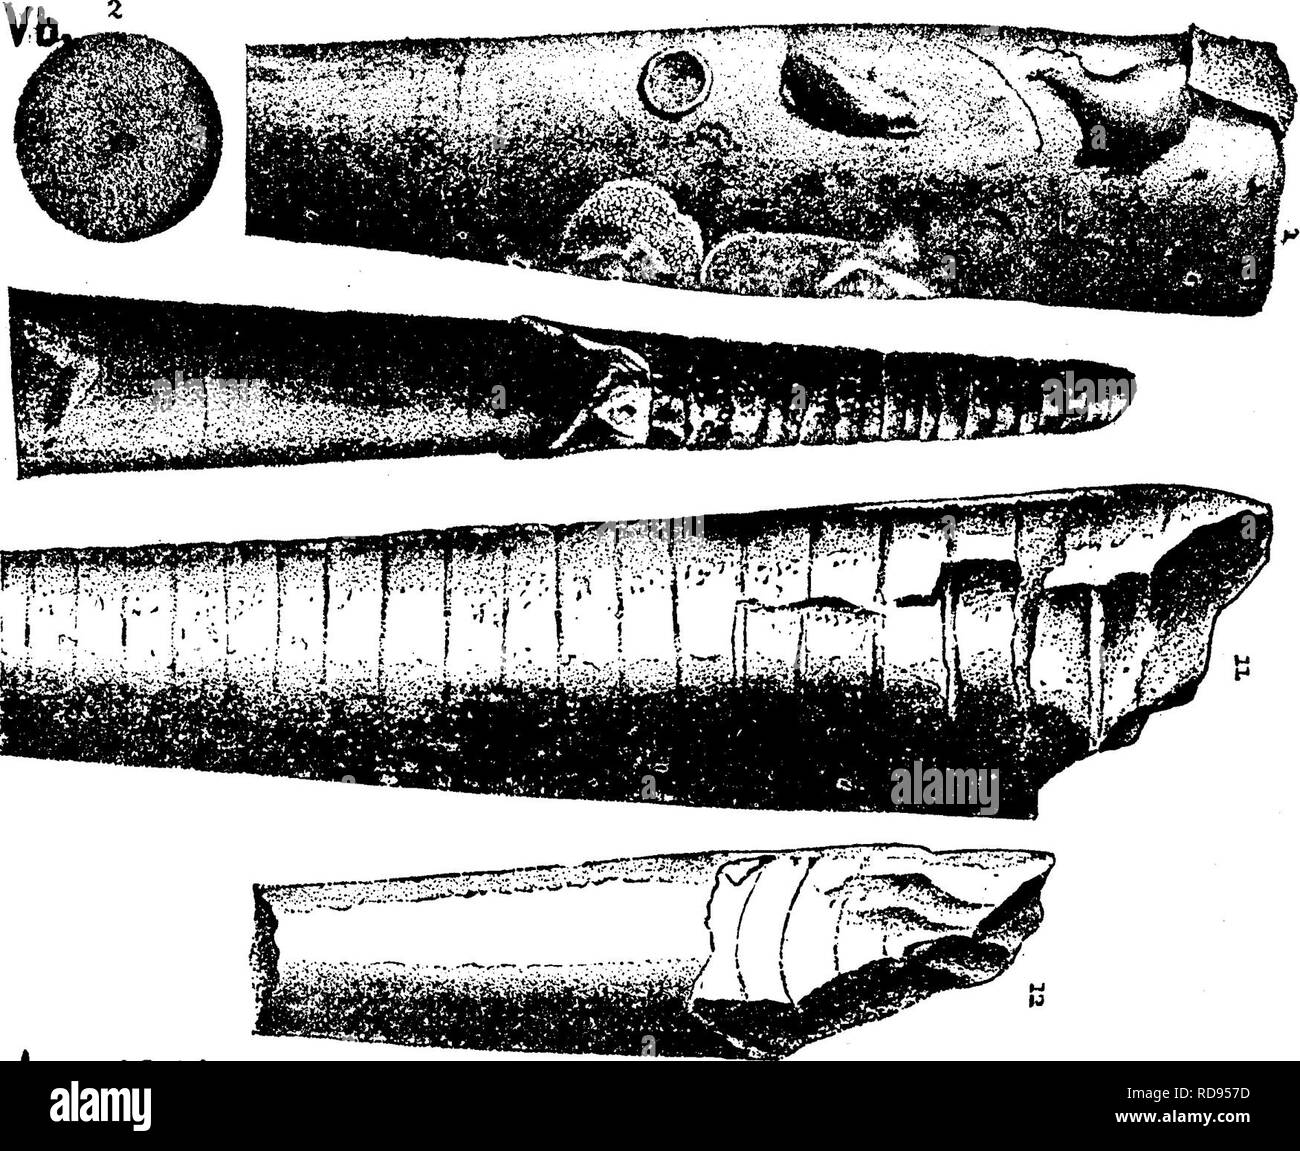 . A dictionary of the fossils of Pennsylvania and neighboring states named in the reports and catalogues of the survey ... Paleontology. 557 Orthoc. taper, a fragment an inch long showing scarcely a perceptible narrowing; 12^ chambers in an inch of length. Large speci- mens (2'^ indiam.) show the peculiar characteristic puncta- tion. Arisaig, N. Scotia.— V? Orthoceras rushense. (McChesney, New Pal. Foss. Coal Measures, 1860.) Collett's Indiana Report 1883, page 164, plate 36, flg. |^;ci. t)Sh^^^^^^^^^^^^^^Si^^ ^^ natural si^e, side view of fragment. Attached to it are four valves of Crania m Stock Photo